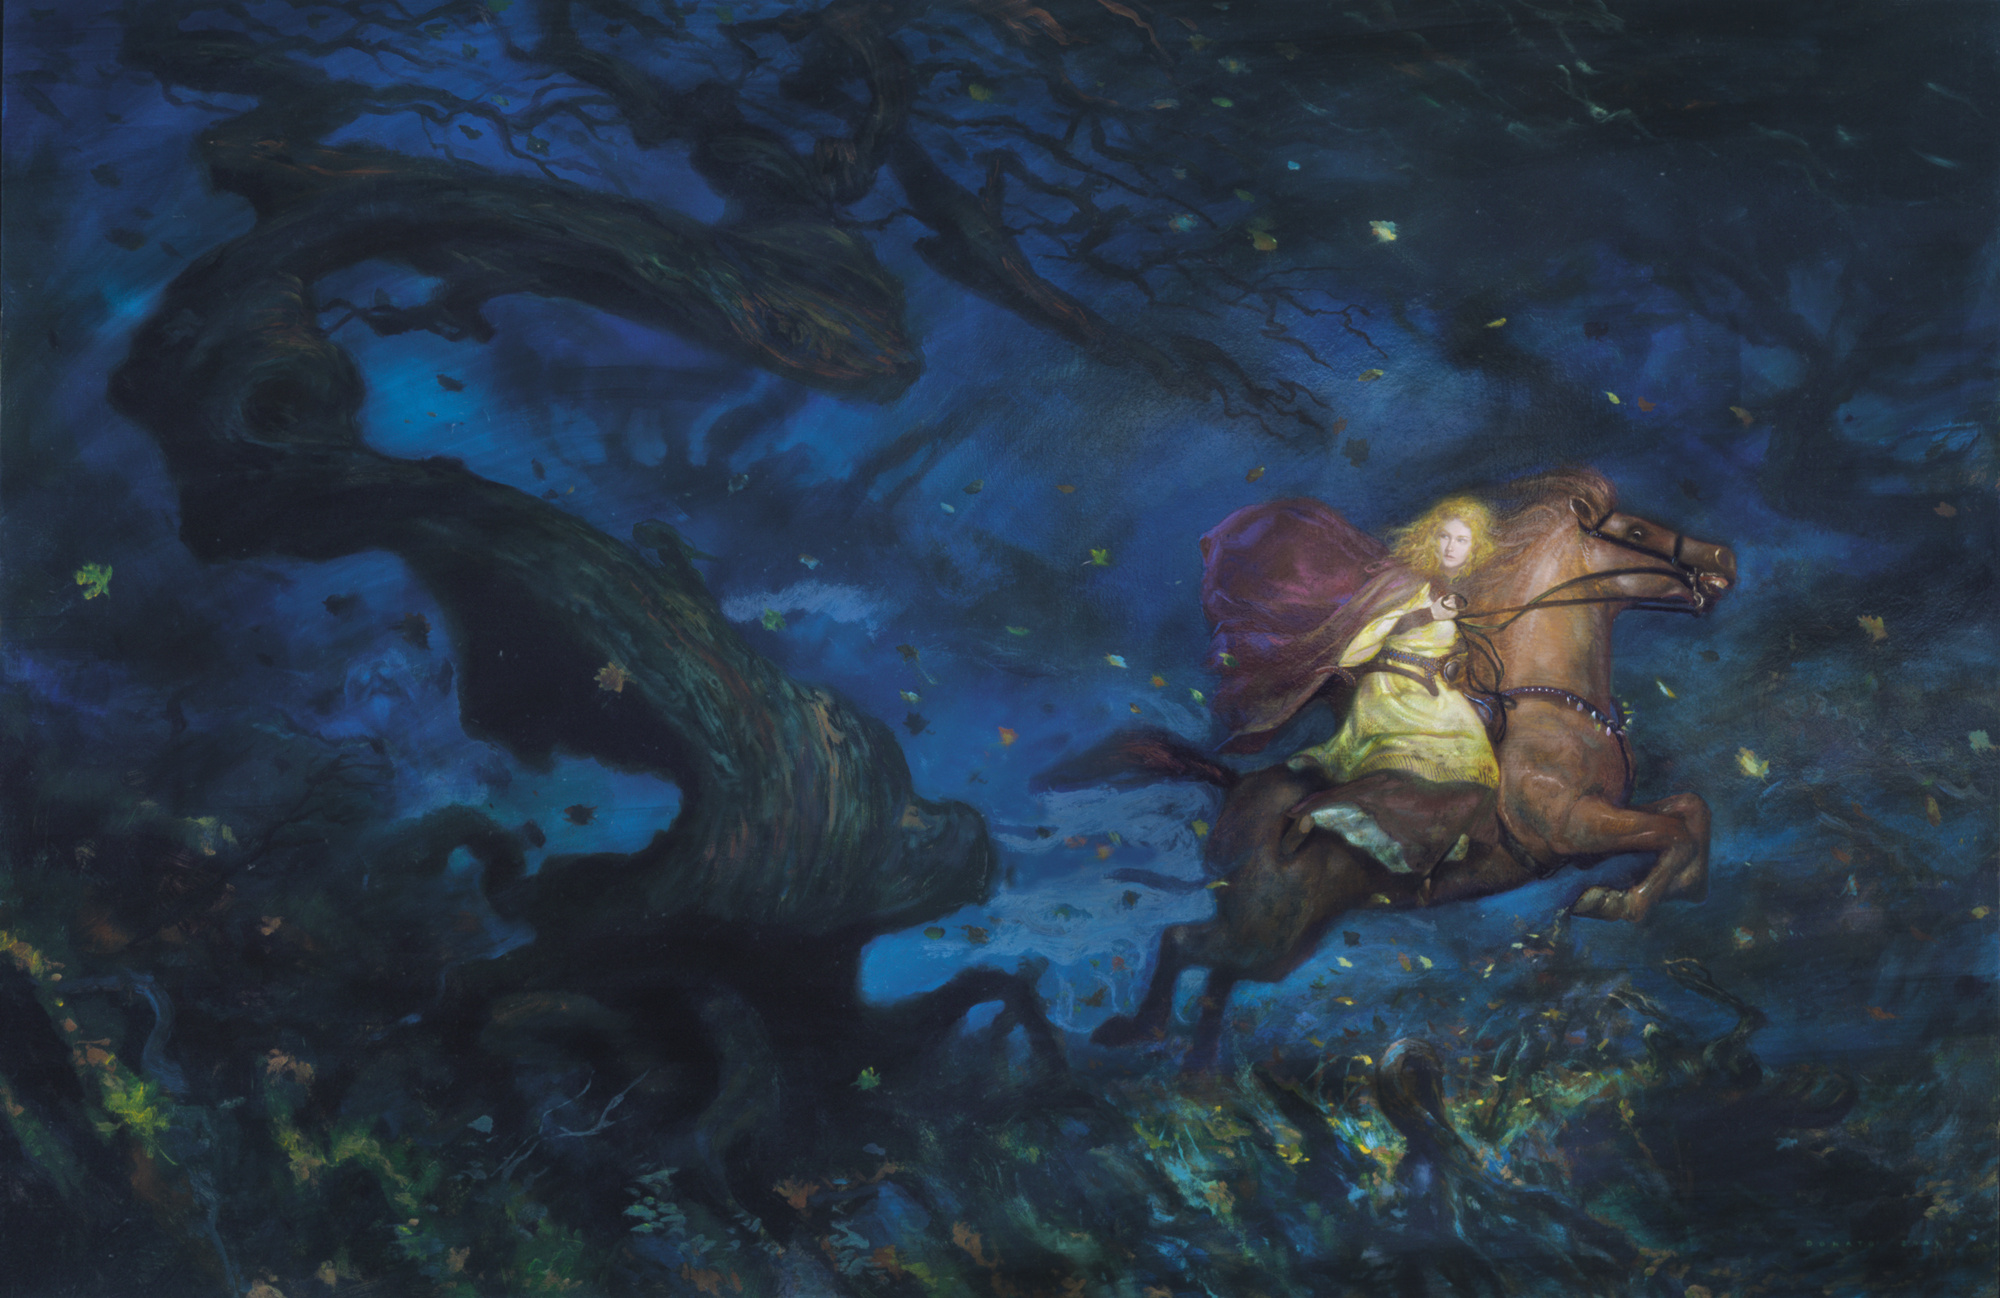 Pursuit of the Fairies
24" x 36" Oil on Panel
Created as the cover for An Earthly Knight by Janet McNaughton from Simon and Schuster Books
Collection of Mary and George Beahm
